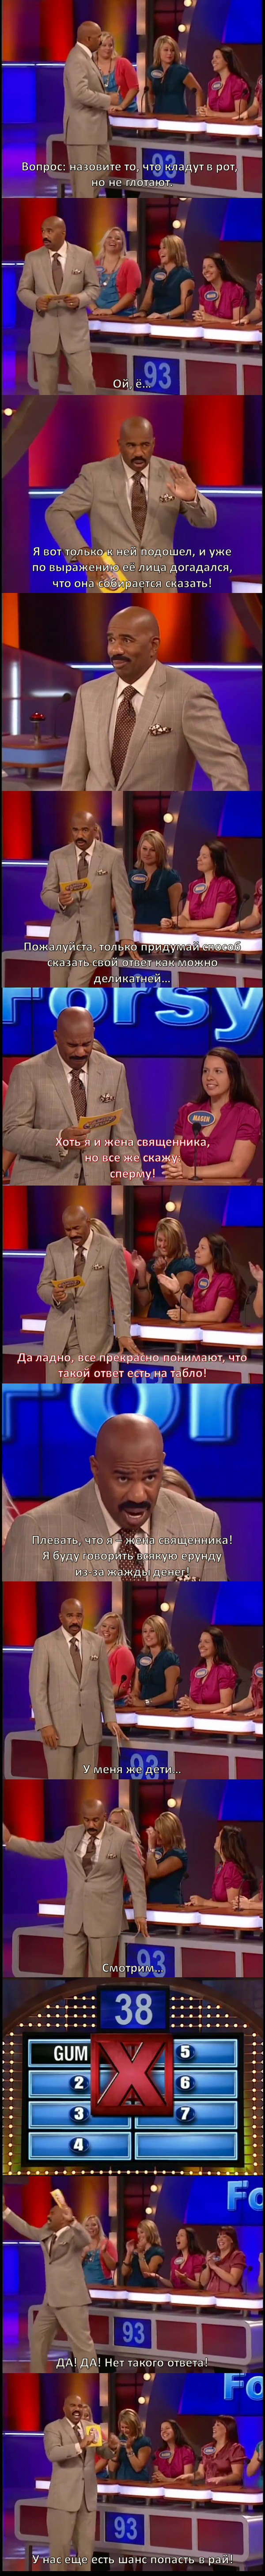 What is not swallowed? | Family Feud/Hundred to One - NSFW, Family Feud, One hundred to one, Longpost, Humor